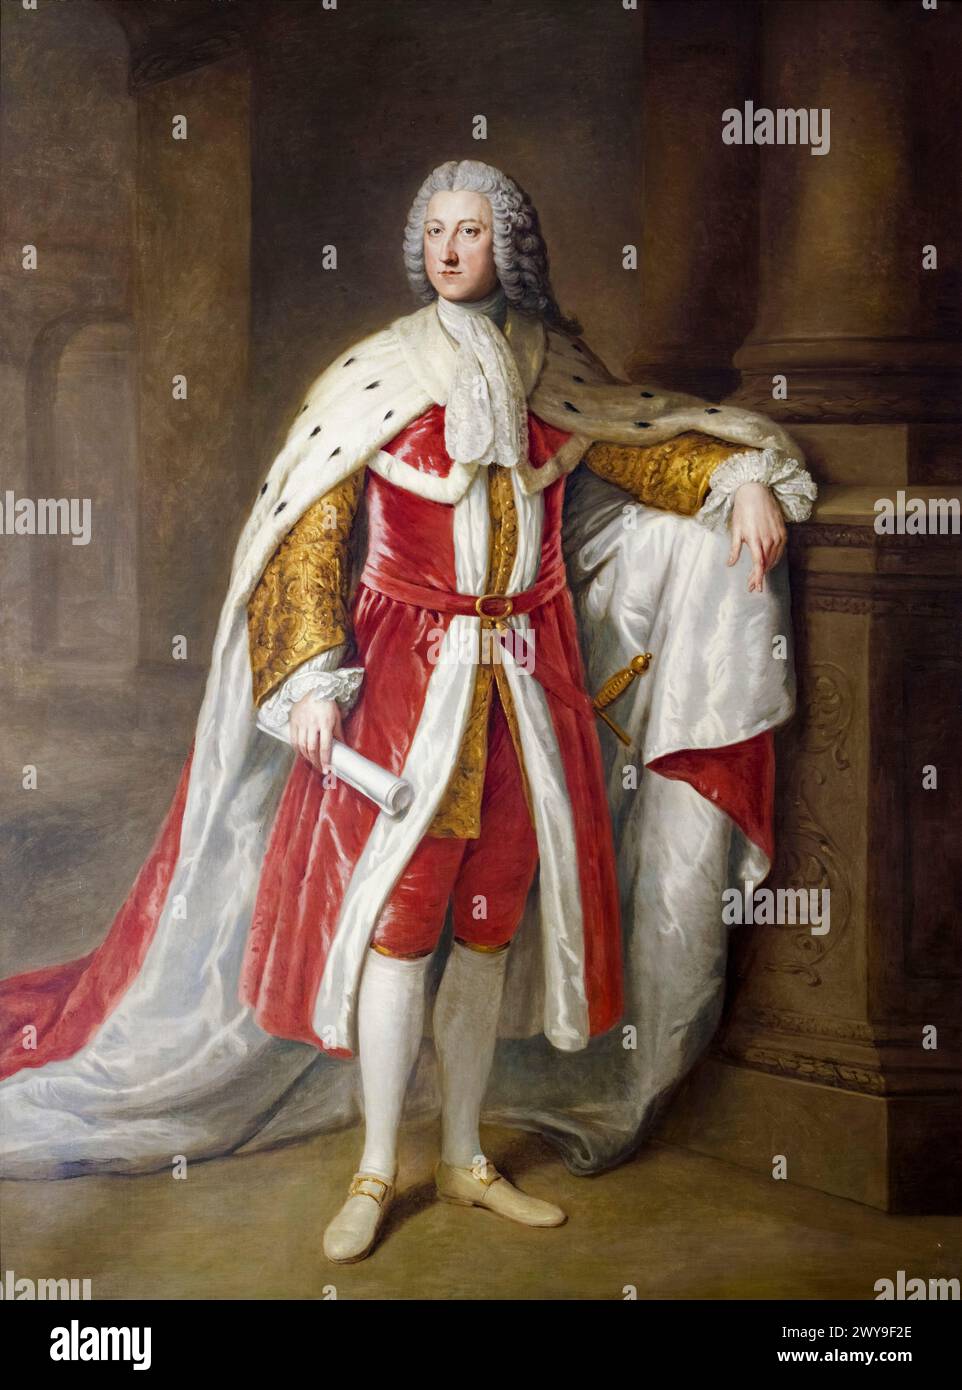 William Pitt the Elder, 1st Earl of Chatham (1708-1778), Whig politician and Prime Minister of Great Britain 1766-1768, portrait painting in oil on canvas by William Hoare, 1772 Stock Photo